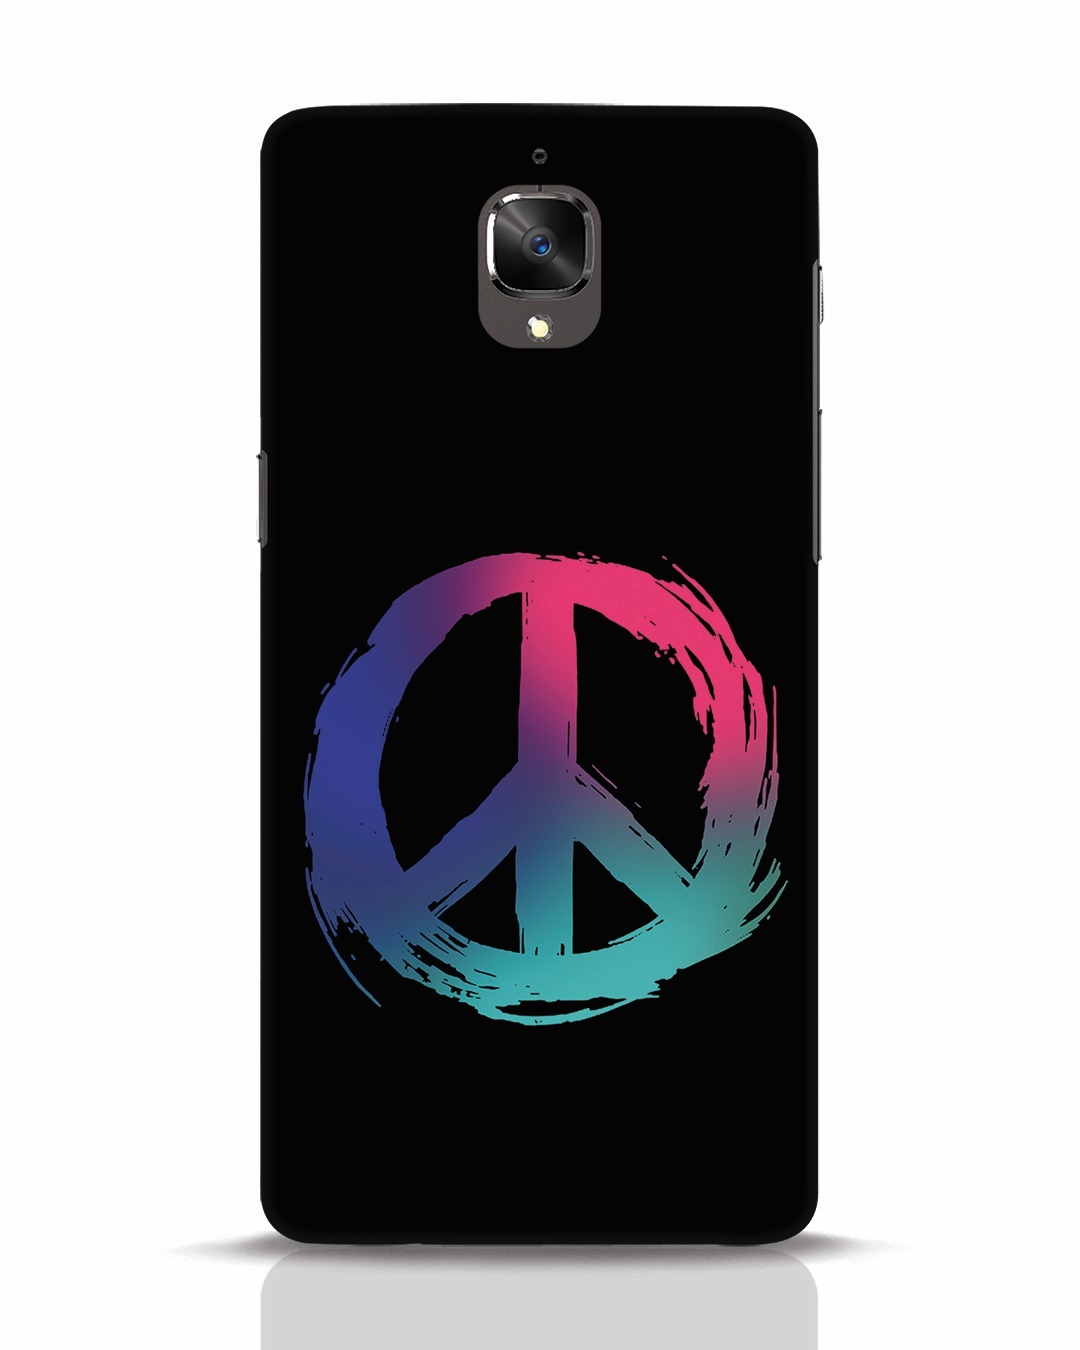 Colors Of Peace OnePlus 3 Mobile Cover OnePlus 3 Mobile Covers Bewakoof.com